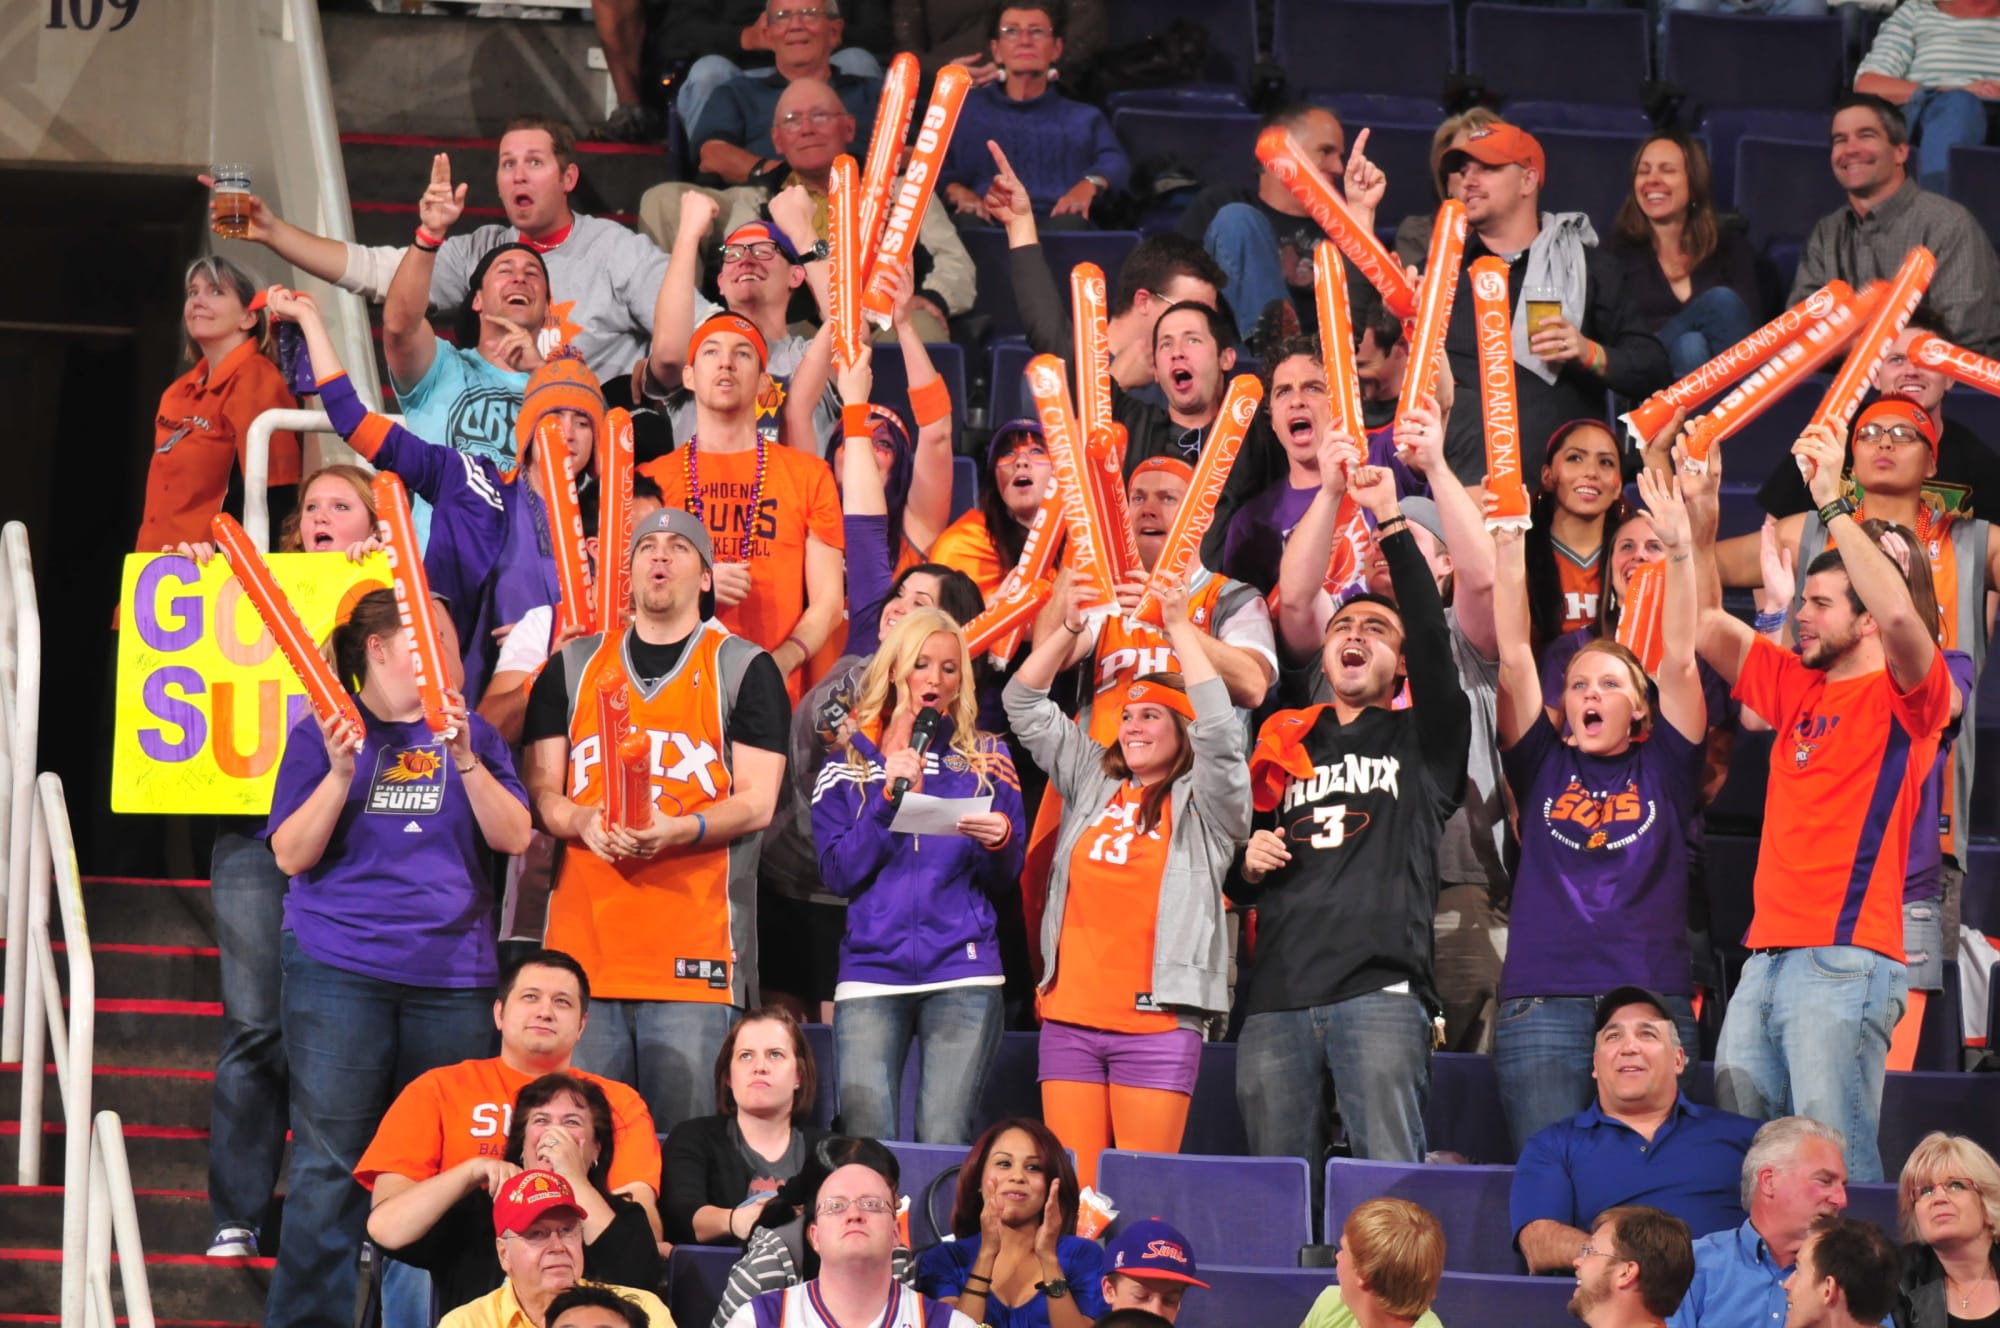 The racial demographics of Suns fans